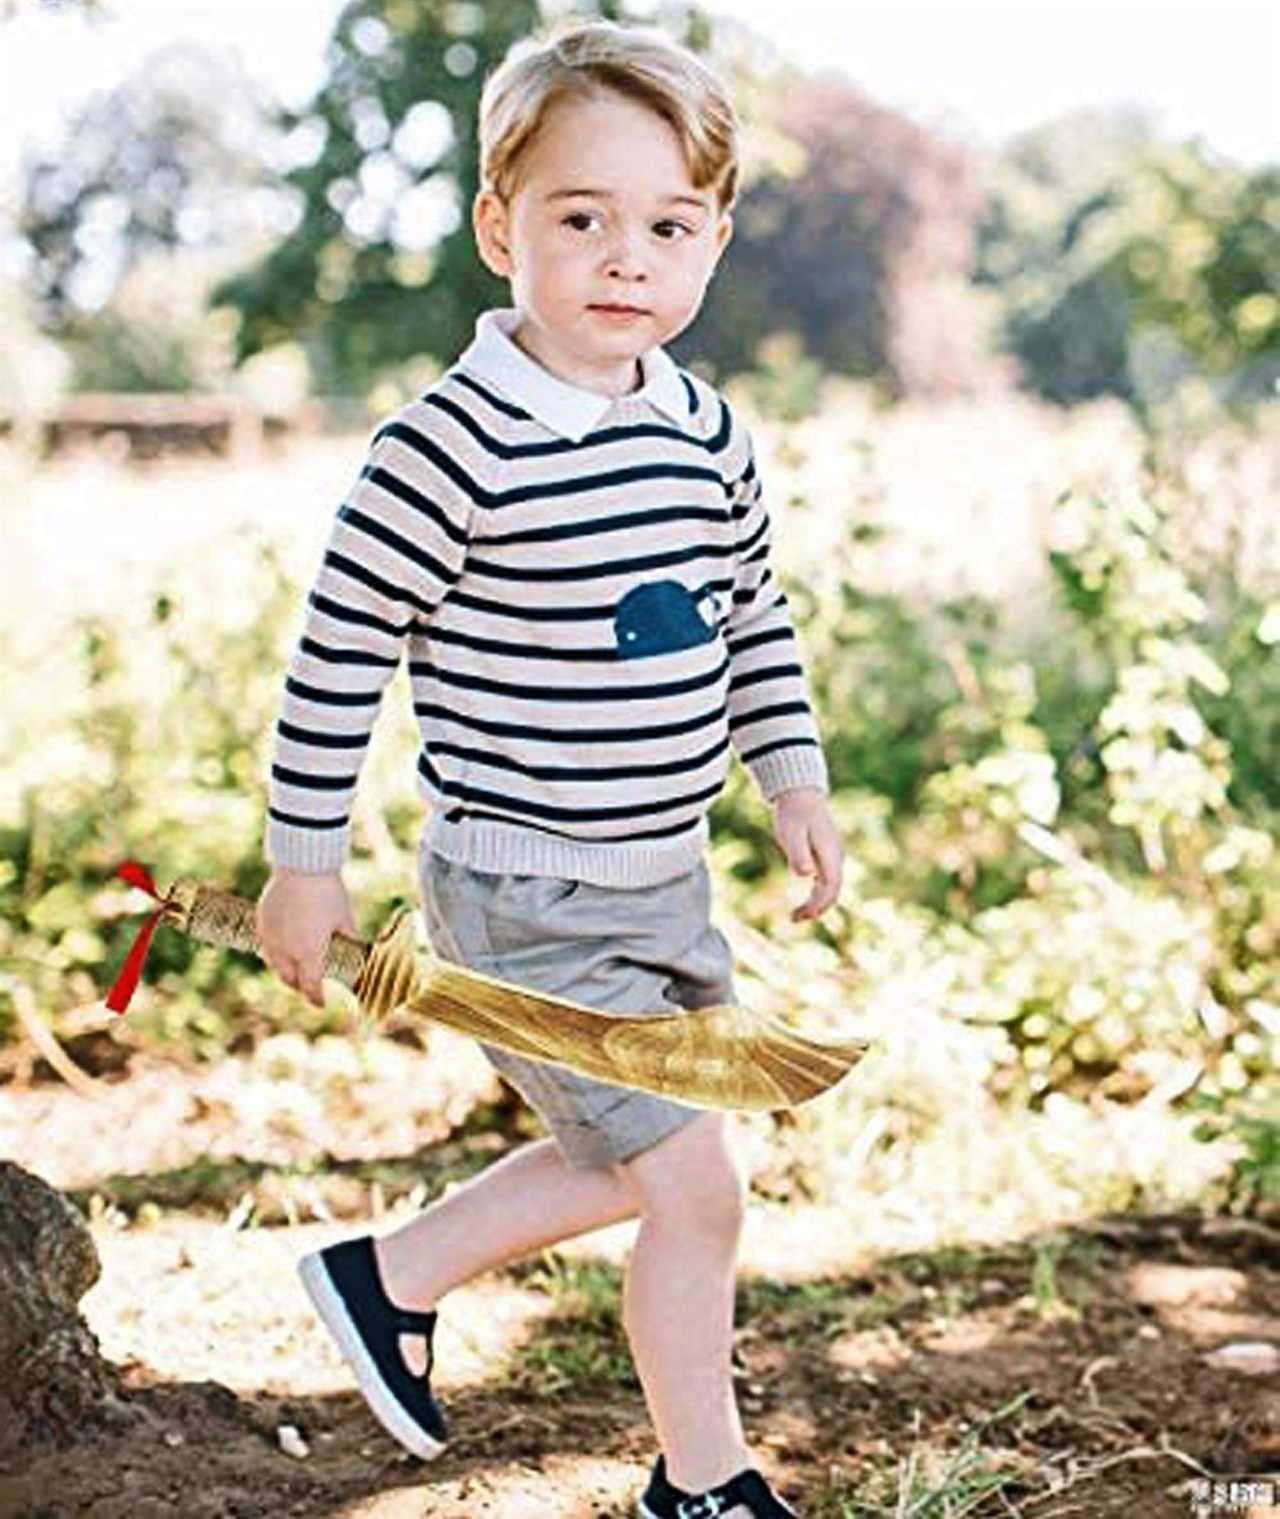 Mocked-up image of Prince George is being used to sell toy machete on Amazon